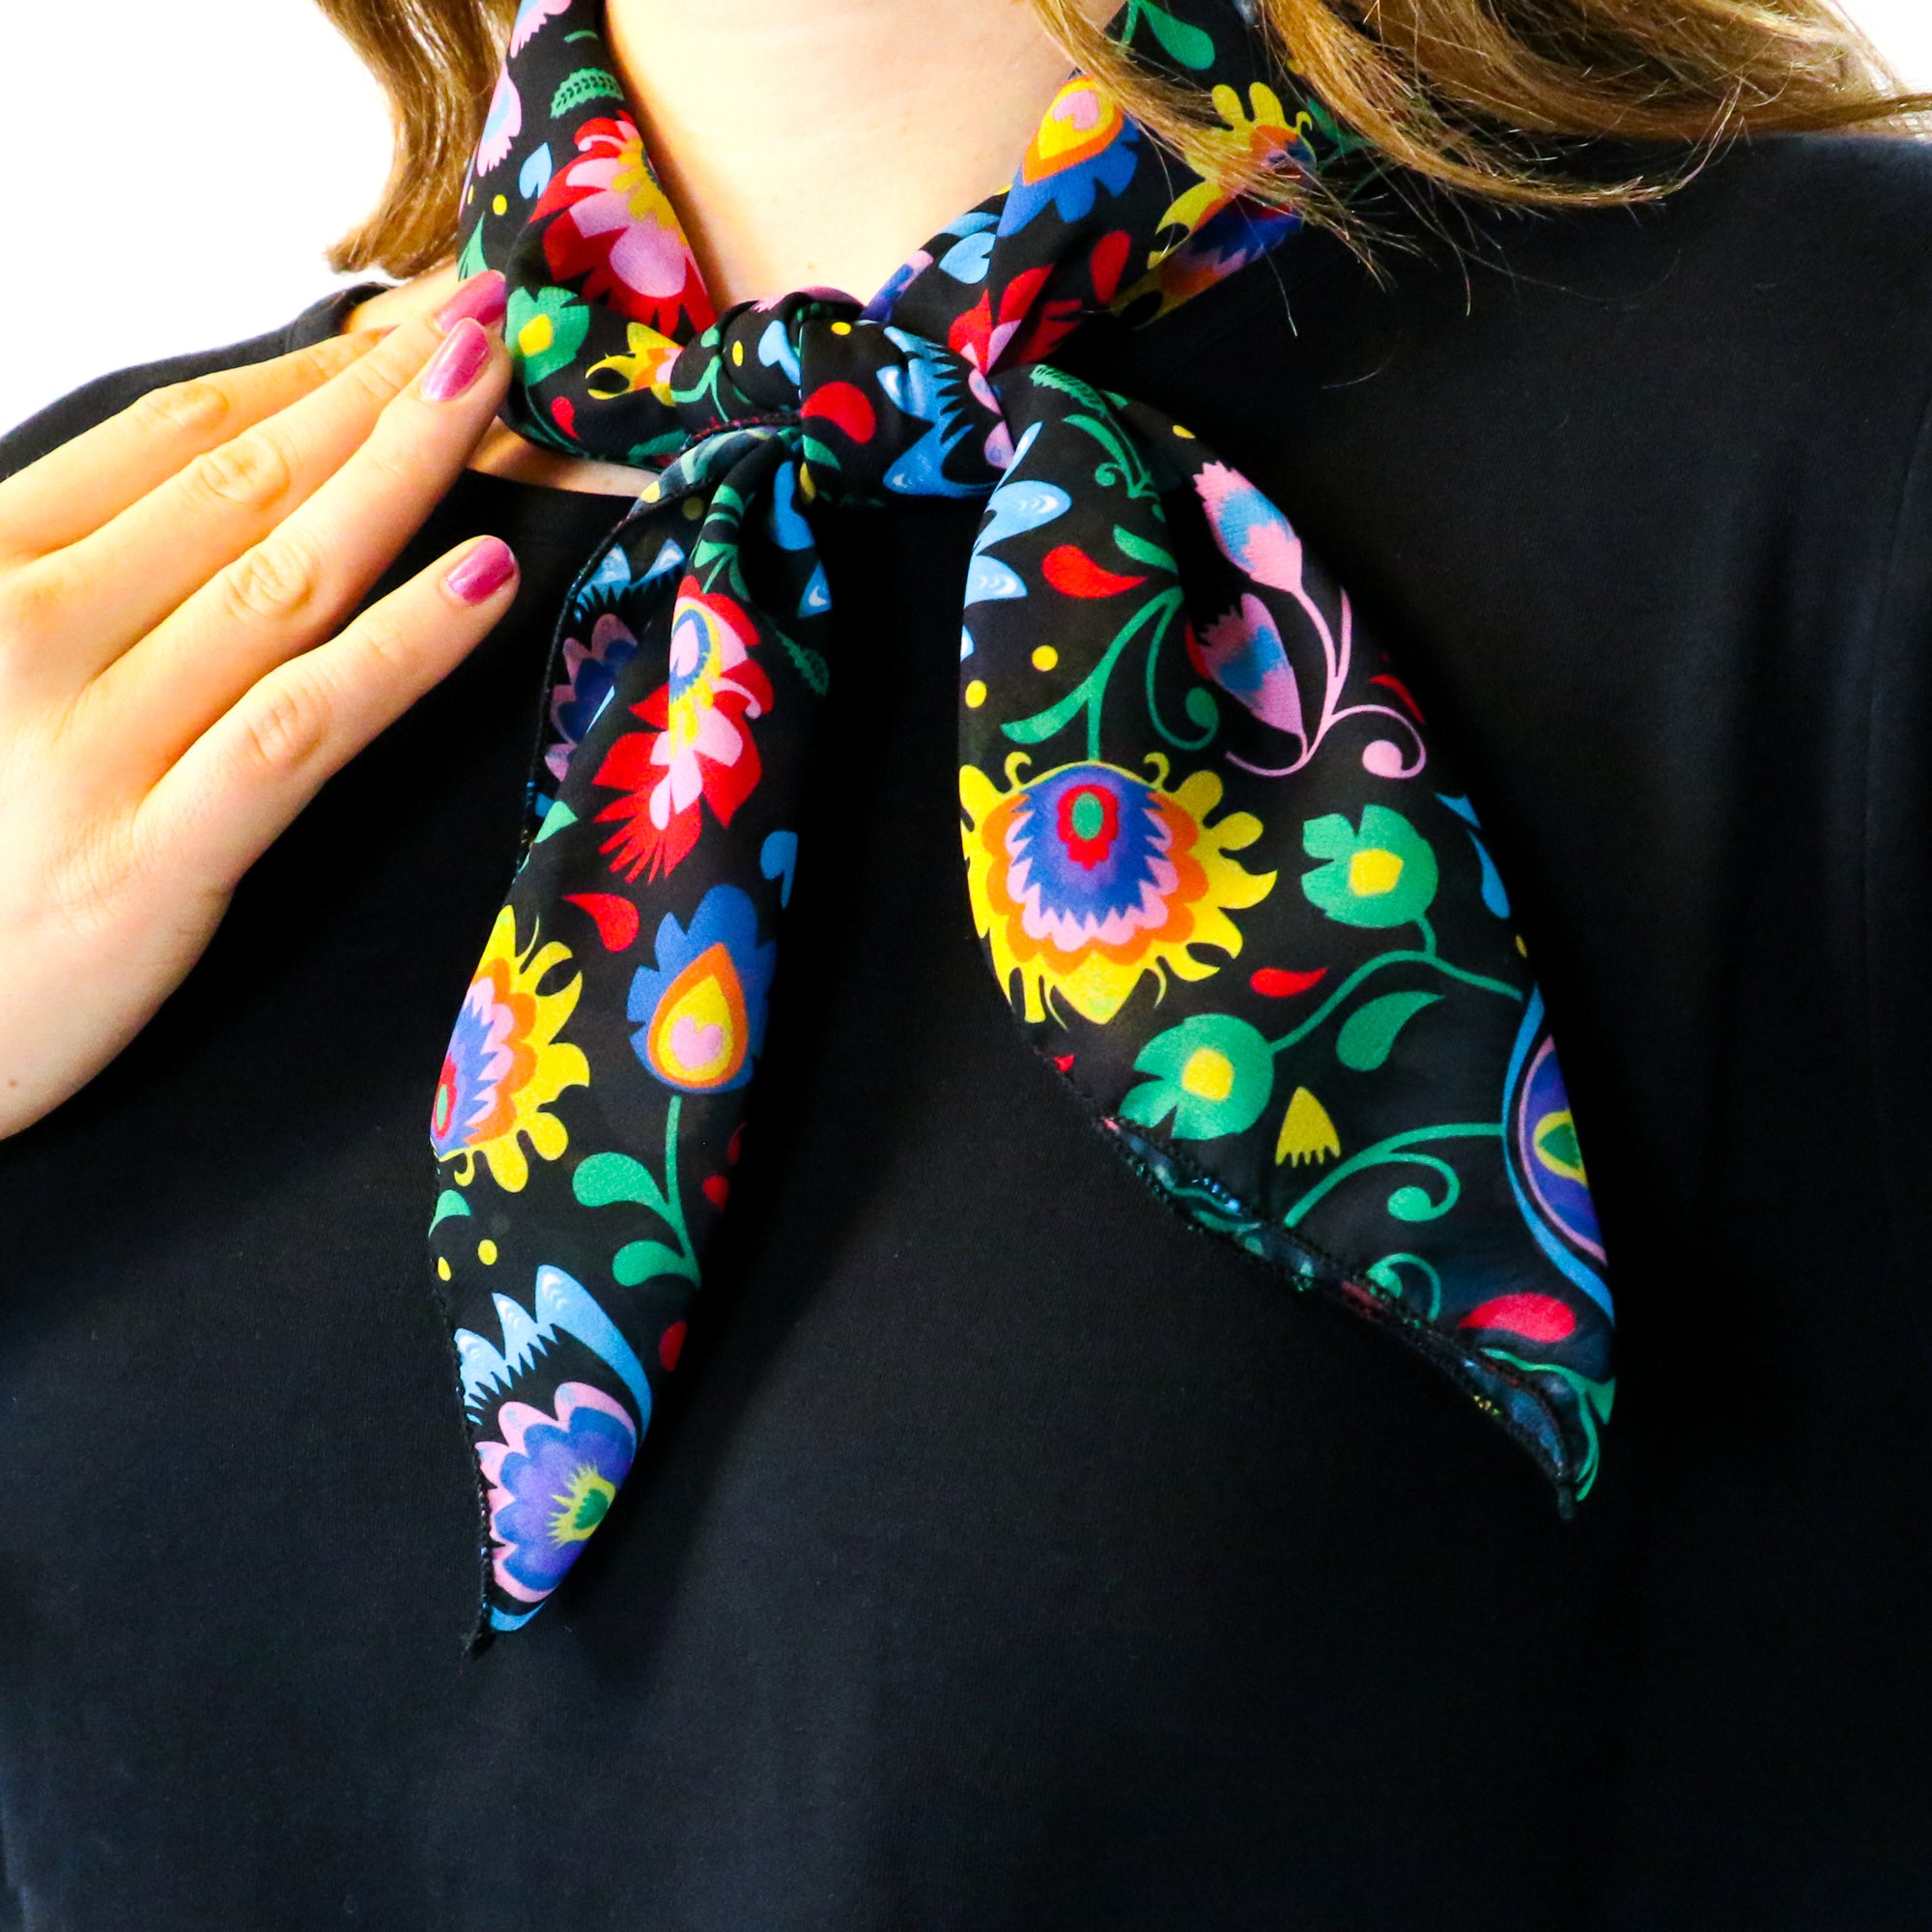 Electric Daisy Square Scarf -  -  - Knotty Tie Co.